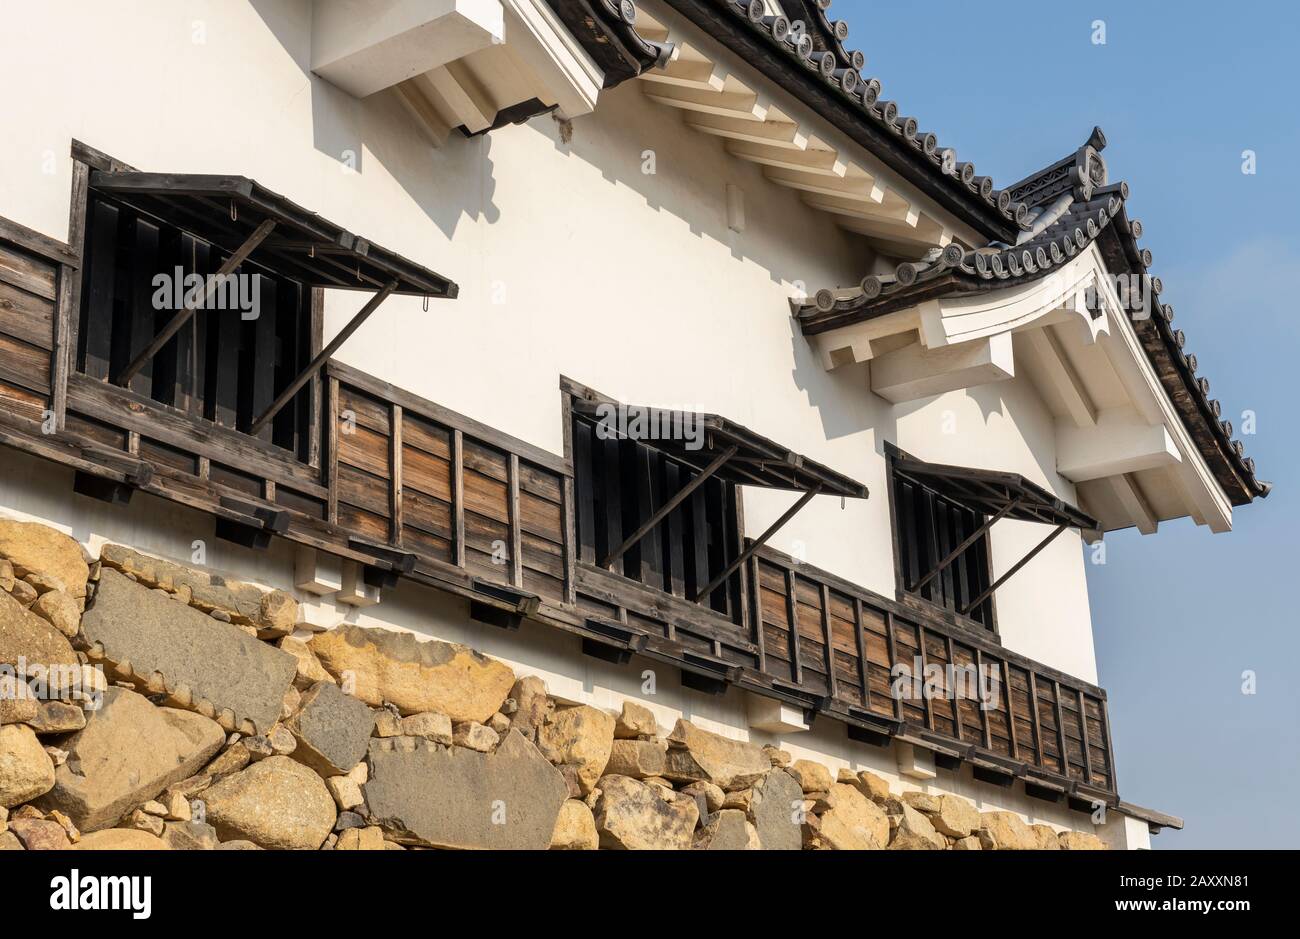 Wooden shutters over windows on the main tower at Hikone Castle in Shiga Prefecture, Japan. Stock Photo